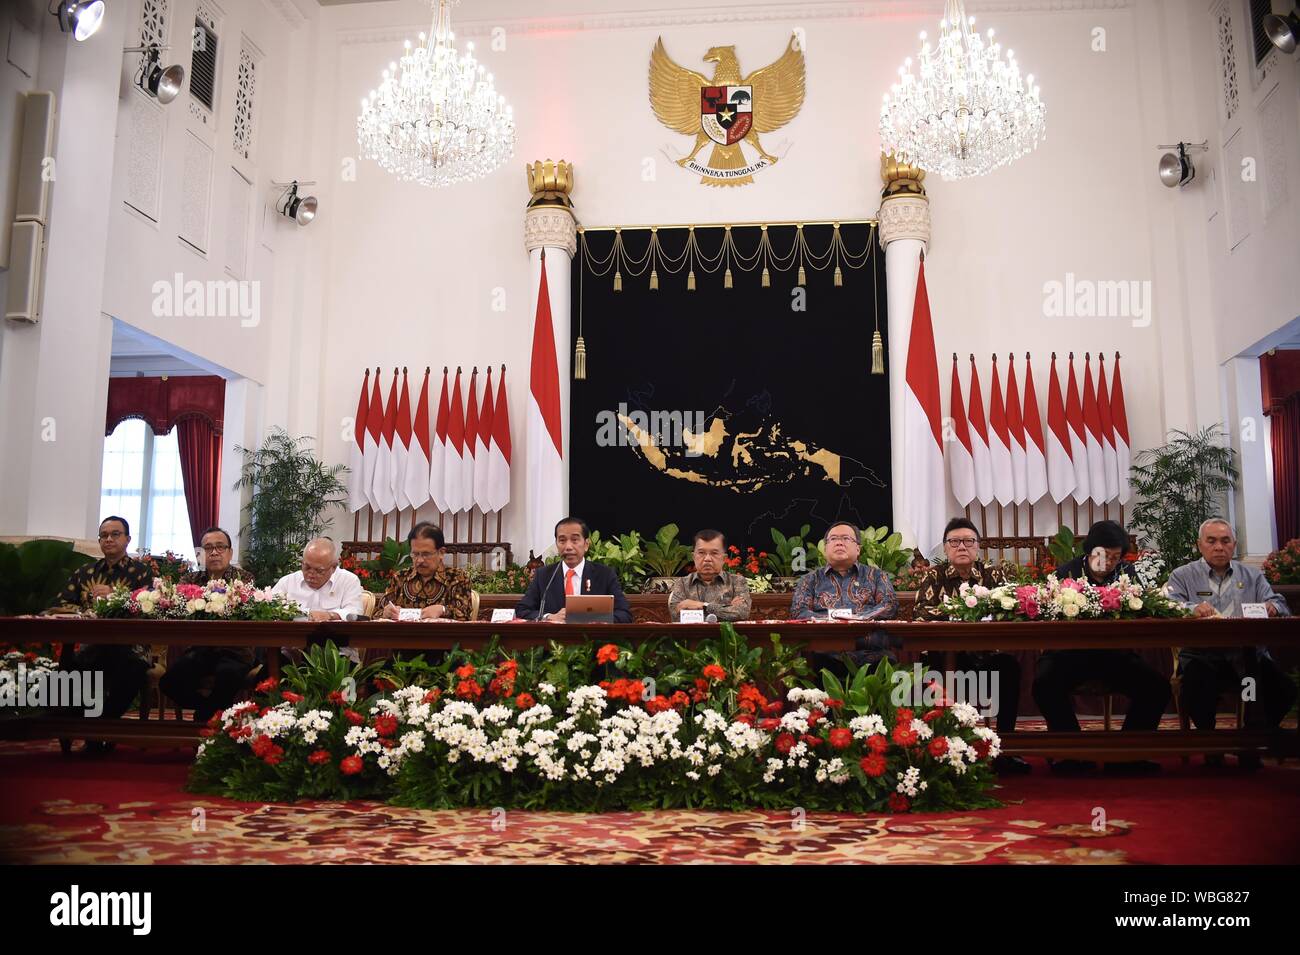 Beijing, Indonesia. 26th Aug, 2019. Indonesian President Joko Widodo (5th L) holds a press conference related to Indonesia's planned new capital at the State Palace in Jakarta, Indonesia, Aug. 26, 2019. Joko Widodo announced on Monday two regencies in East Kalimantan province as the site of the country's new capital. Credit: Zulkarnain/Xinhua/Alamy Live News Stock Photo